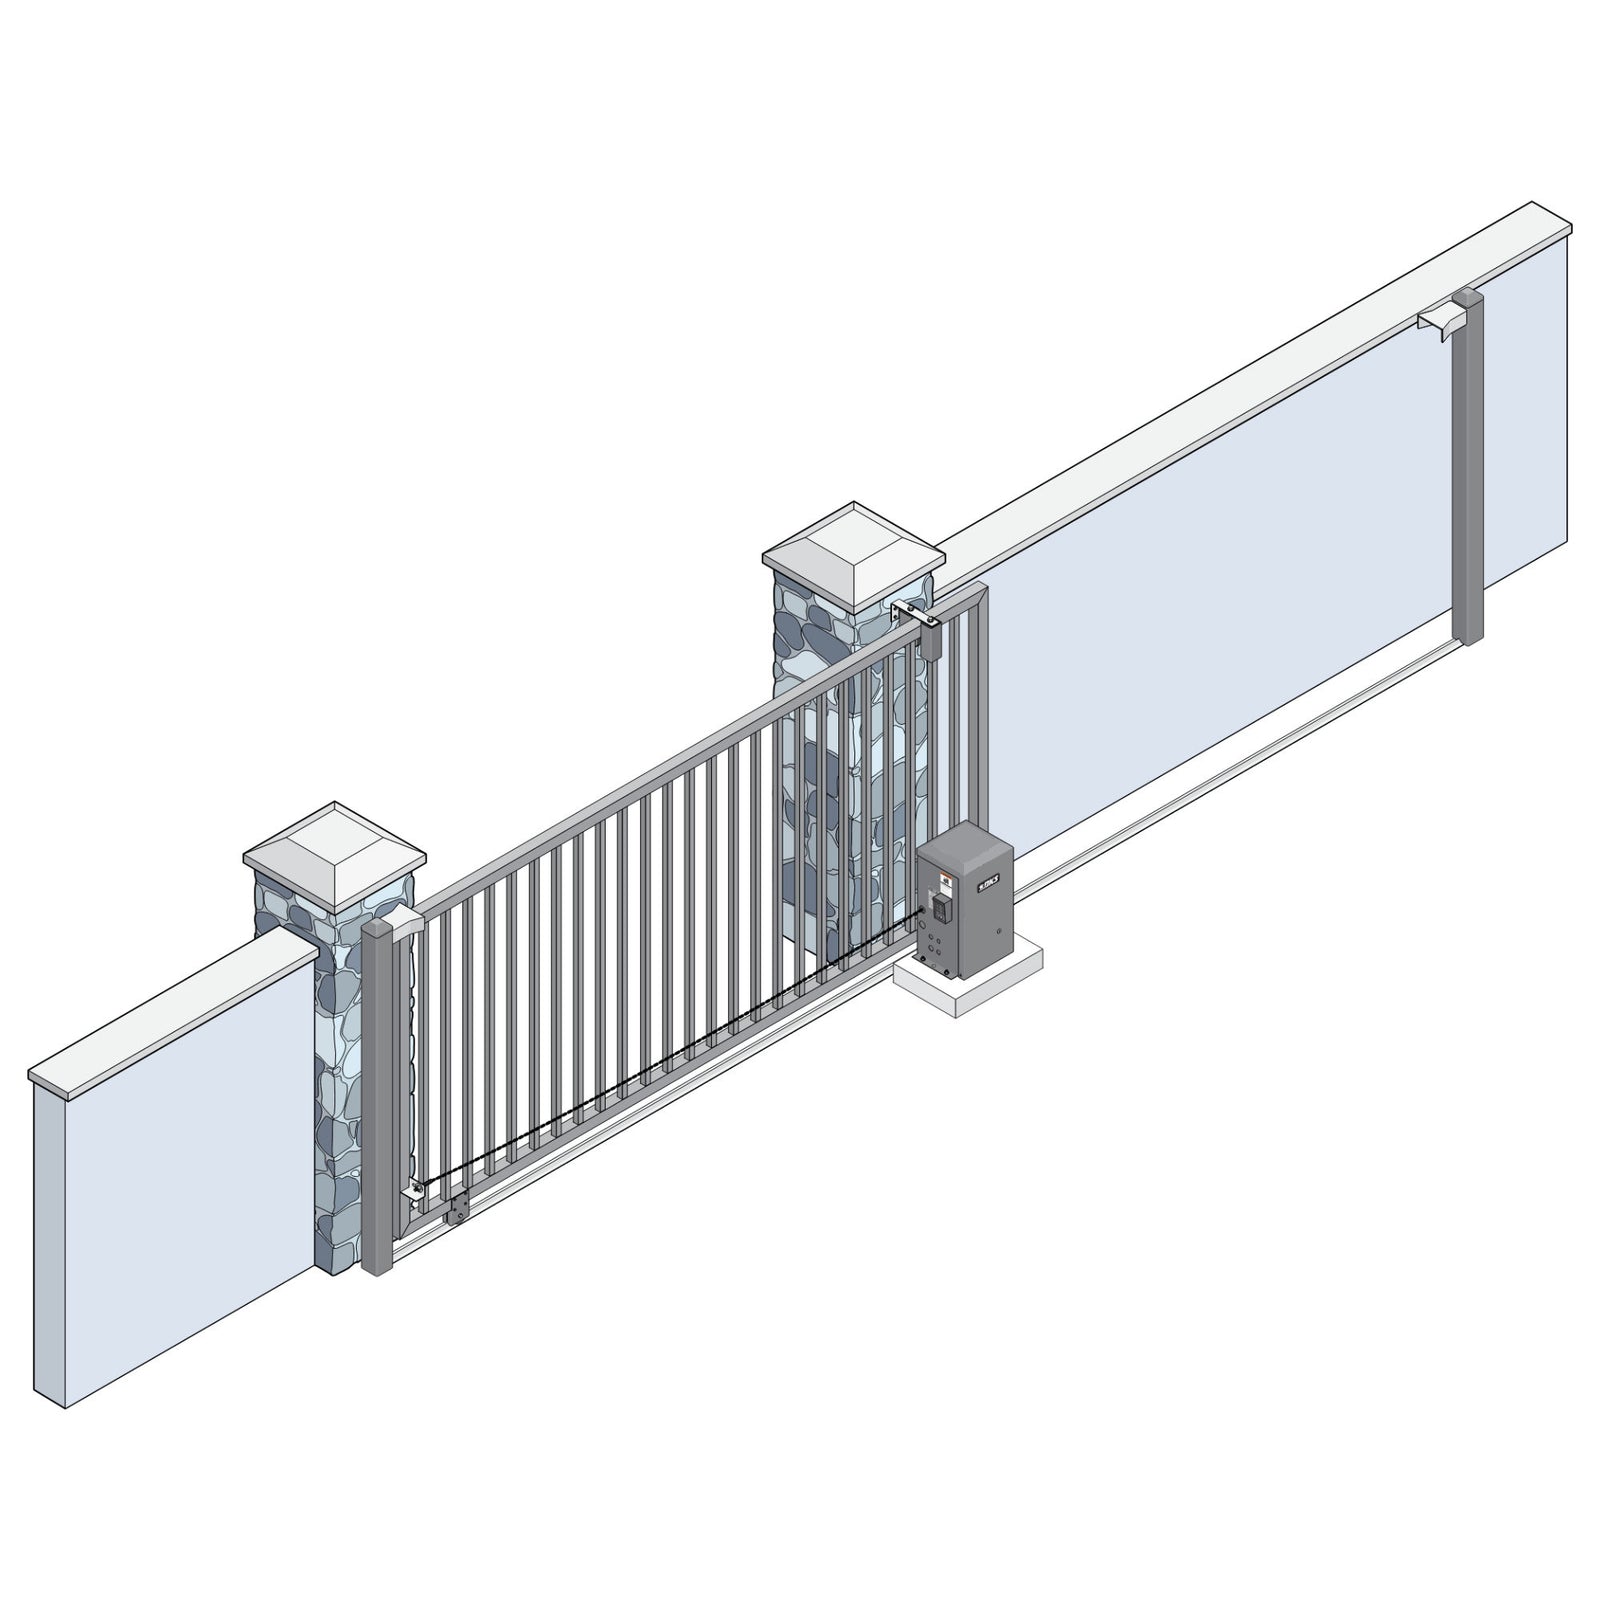 A Comprehensive Guide to Installing and Automatic Slide Gate Opener